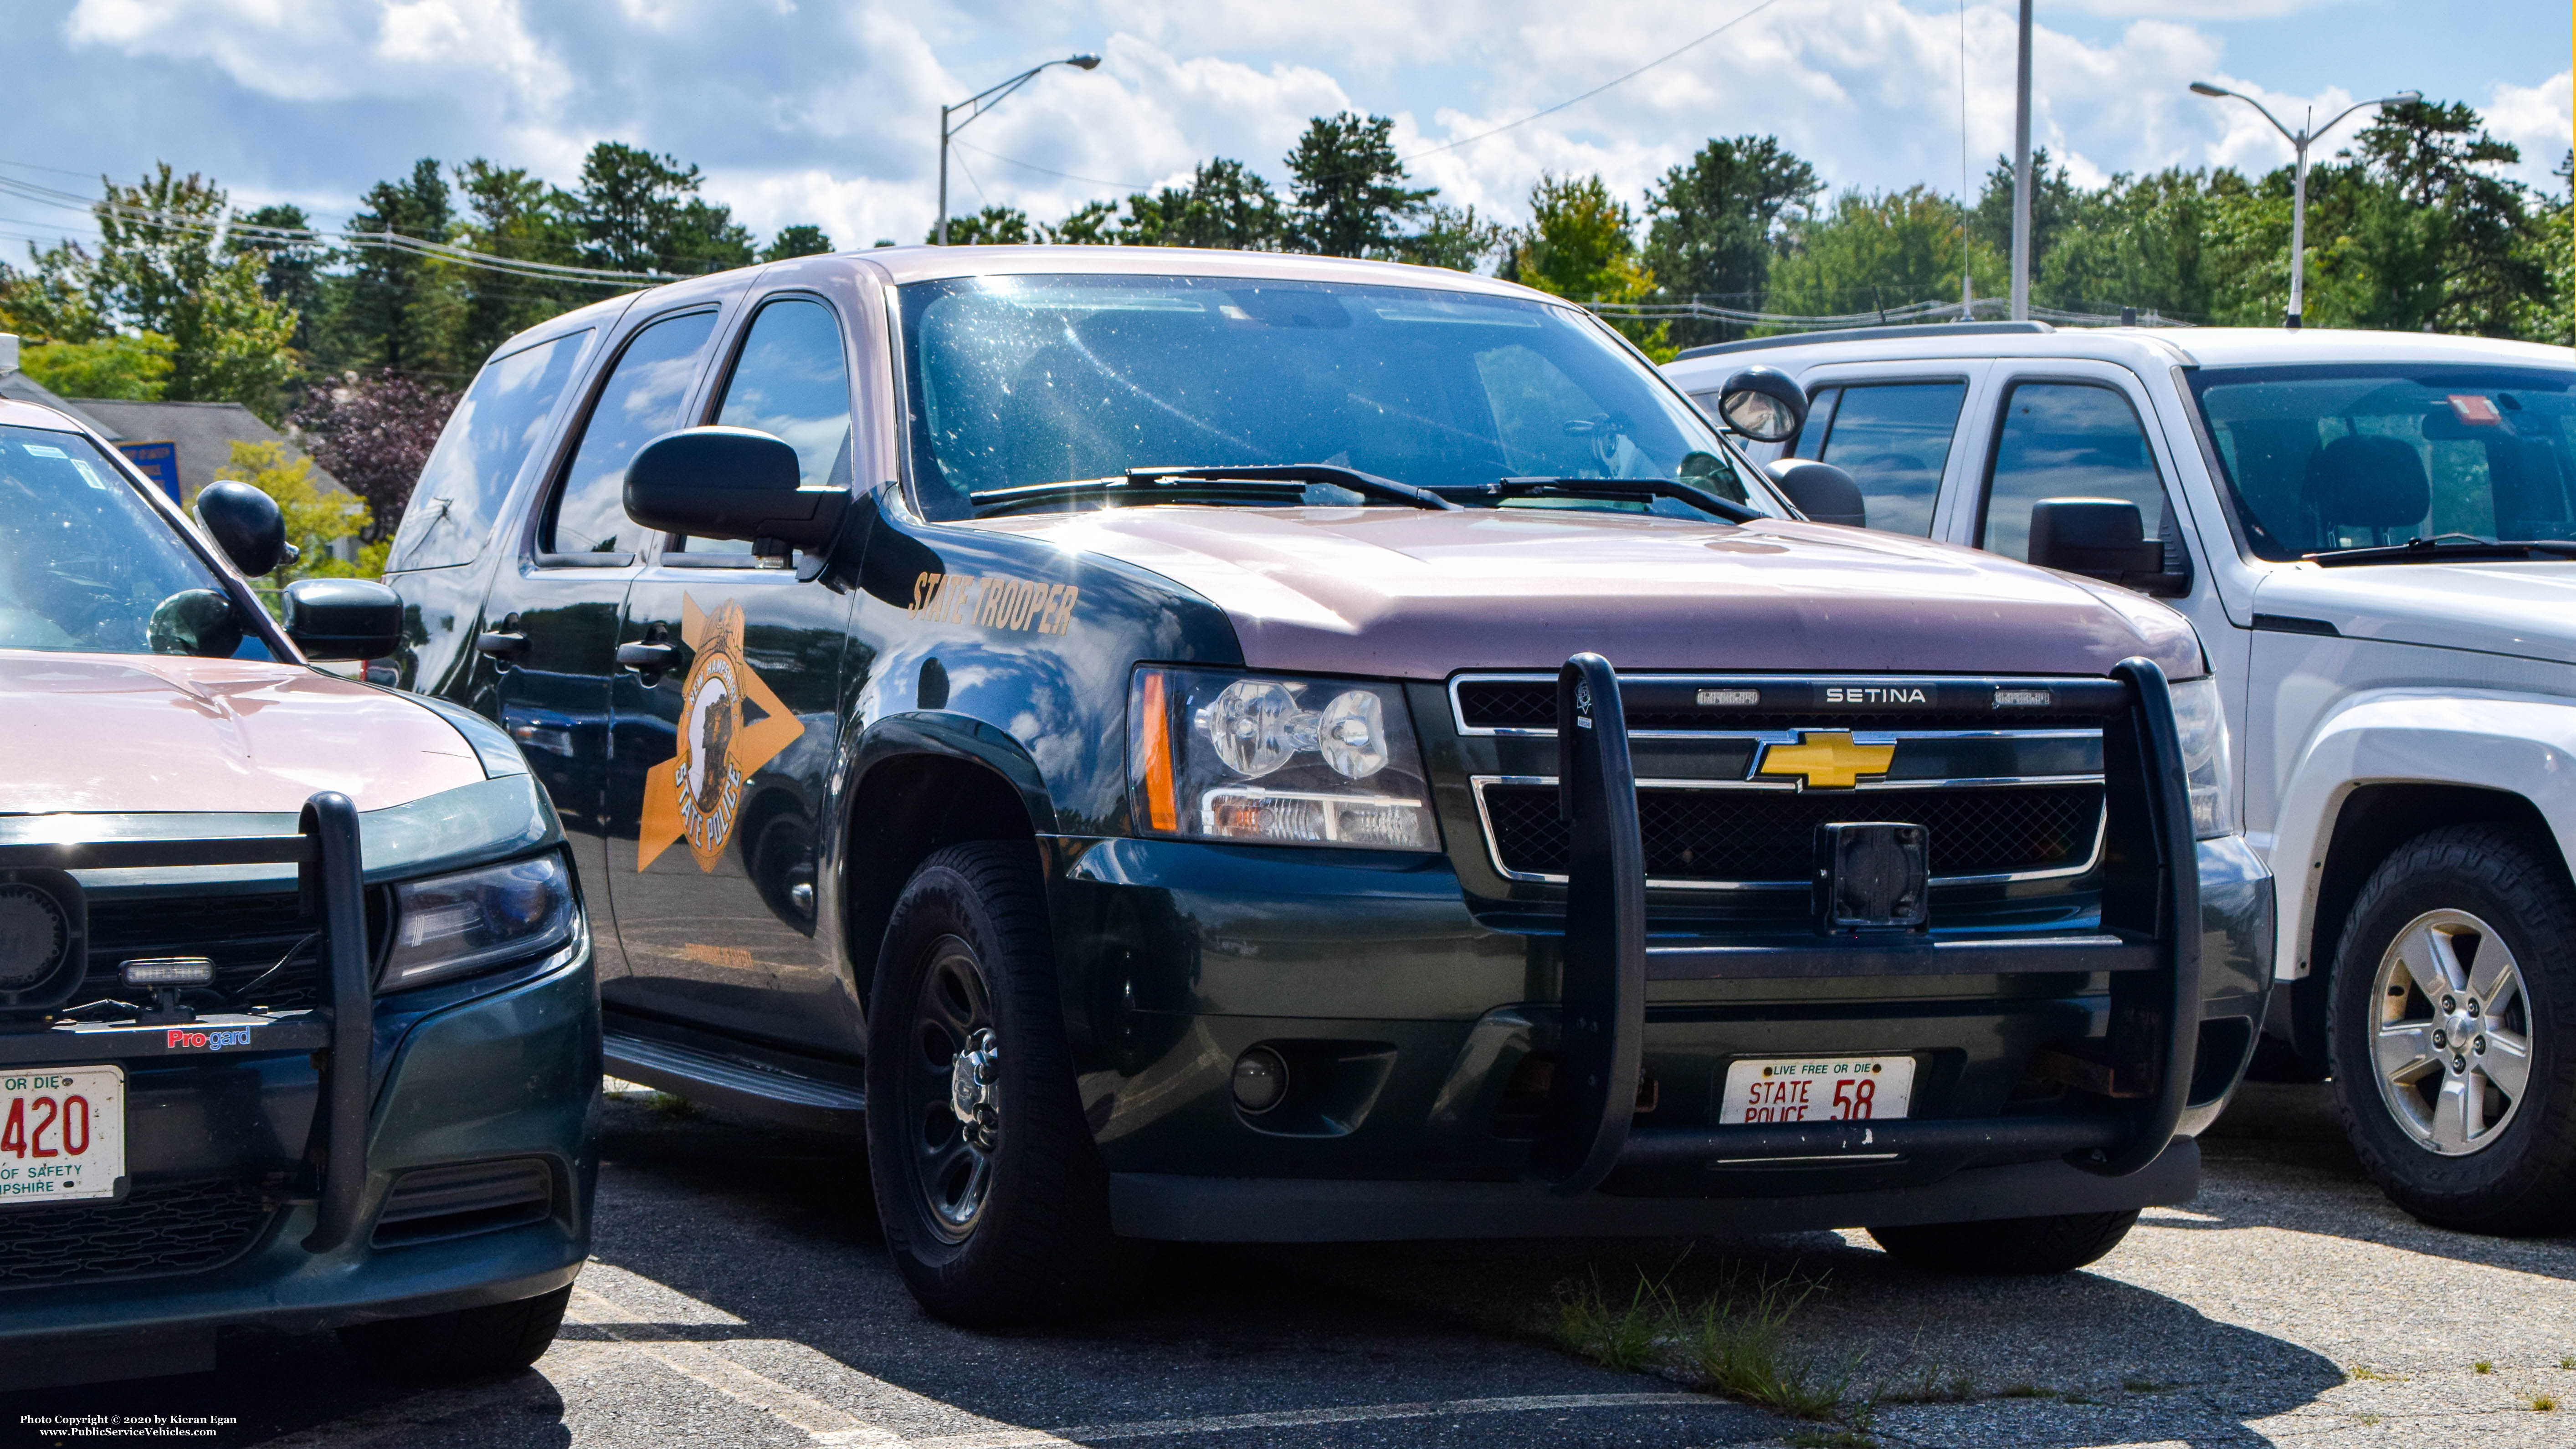 A photo  of New Hampshire State Police
            Cruiser 58, a 2007-2014 Chevrolet Tahoe             taken by Kieran Egan